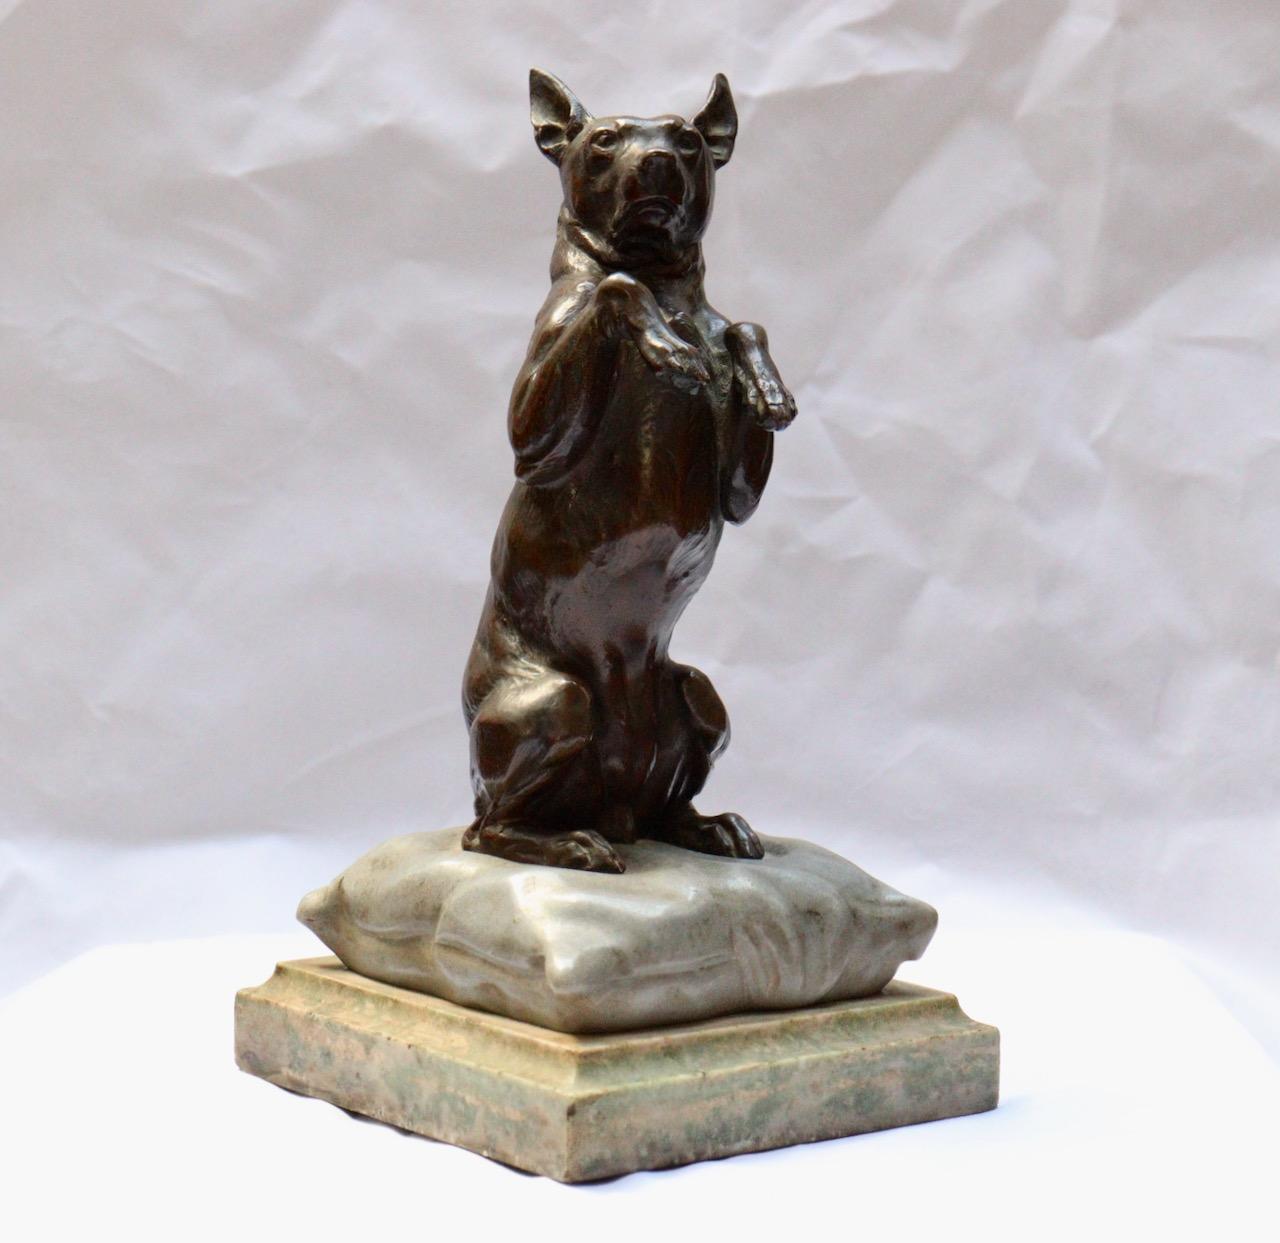 Charles Paillet (1871-1937)
Dog pretending on a pillow
Charming Bronze figure with double patina, brown and unusual grey one.
Signed on the cushion Ch.Paillet
On a square base in green marble
Circa 1900.
     